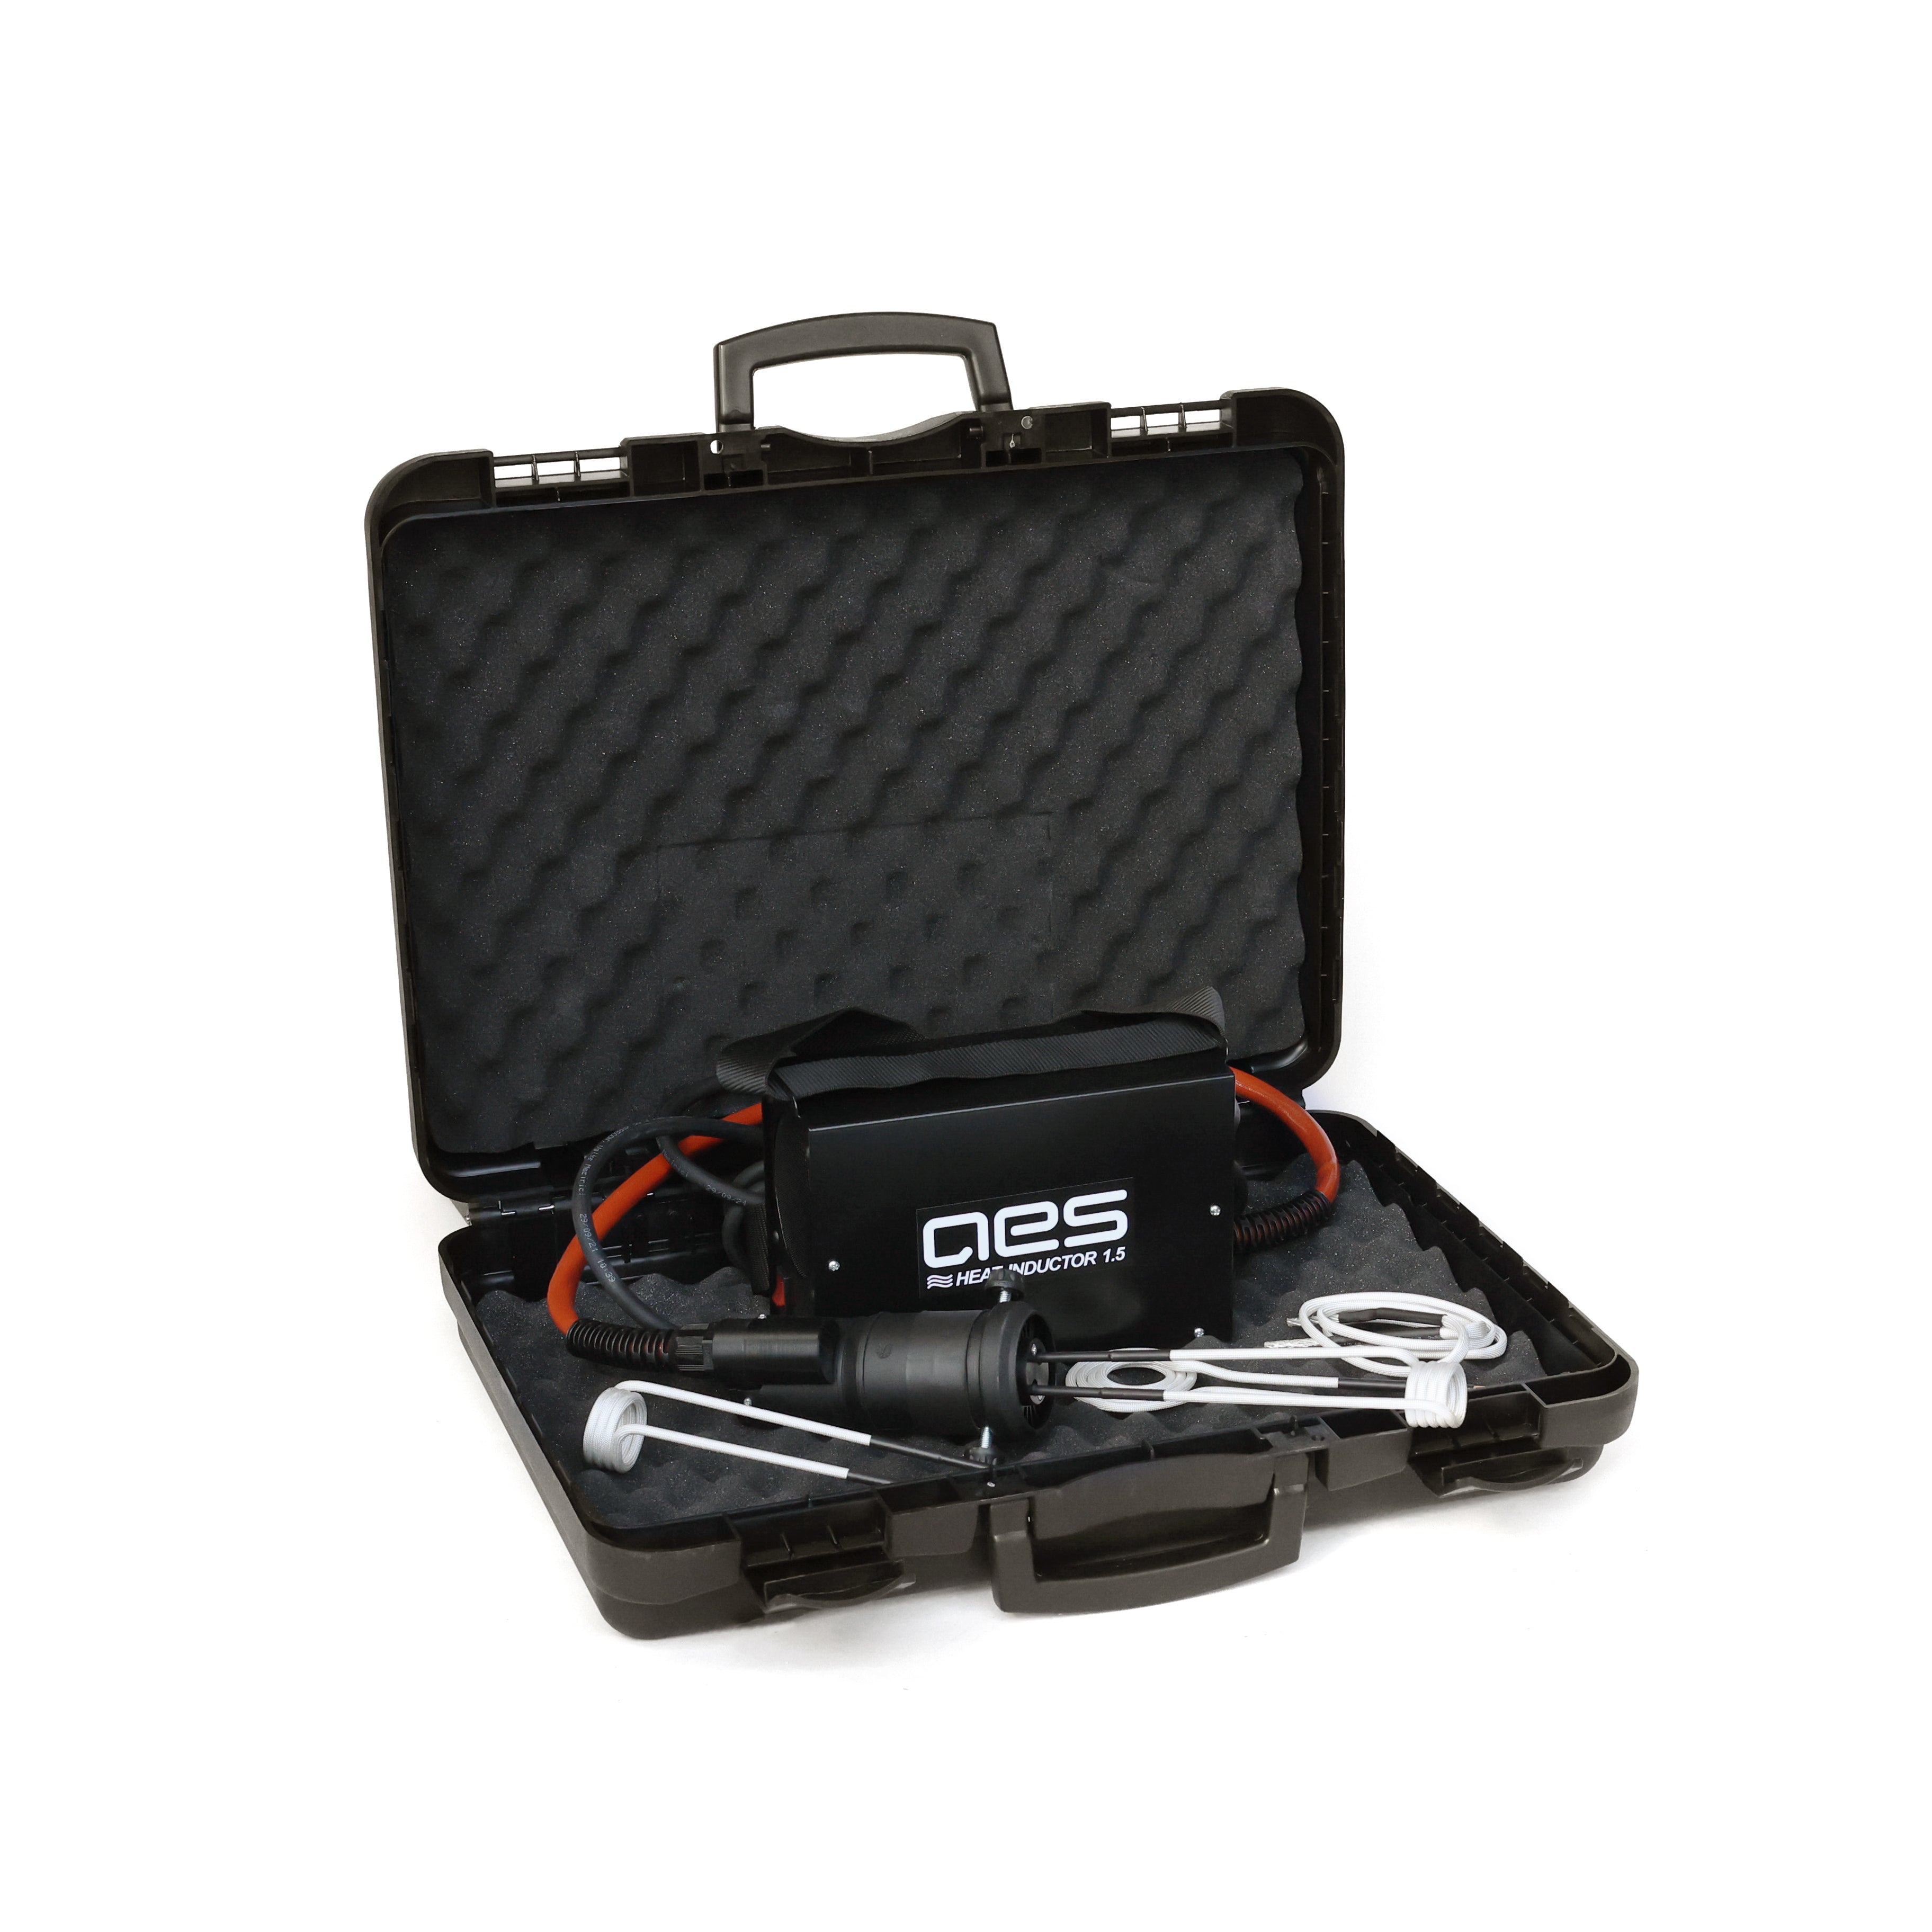 AES HI 1.5kw Portable Induction Heating Tool Kit